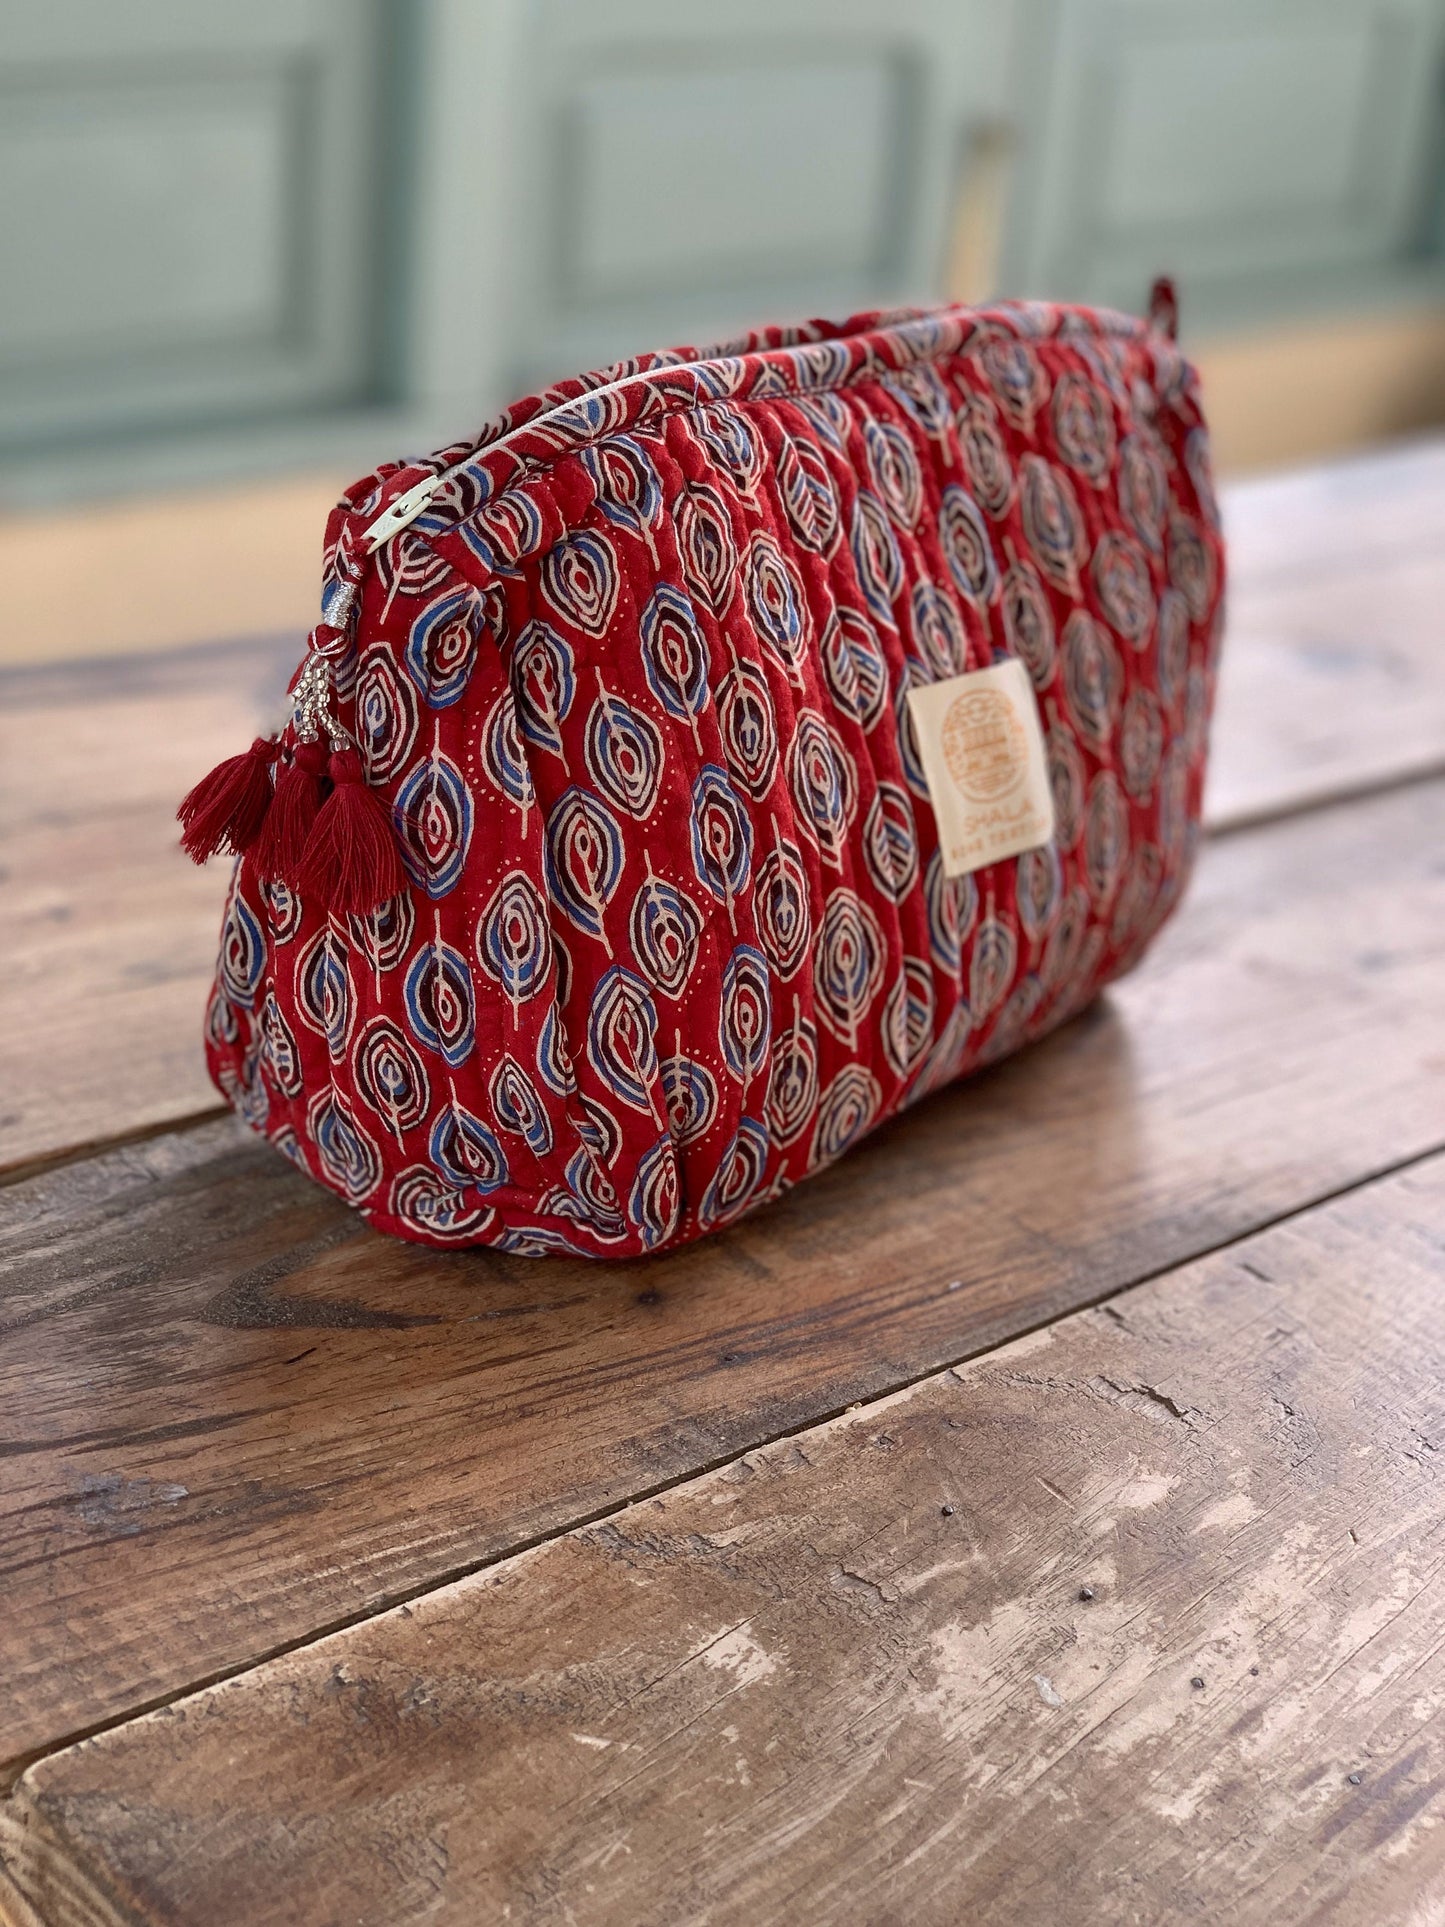 Padded toiletry bag Pure cotton block print in India Padded make-up bag, carry-all Bordeaux